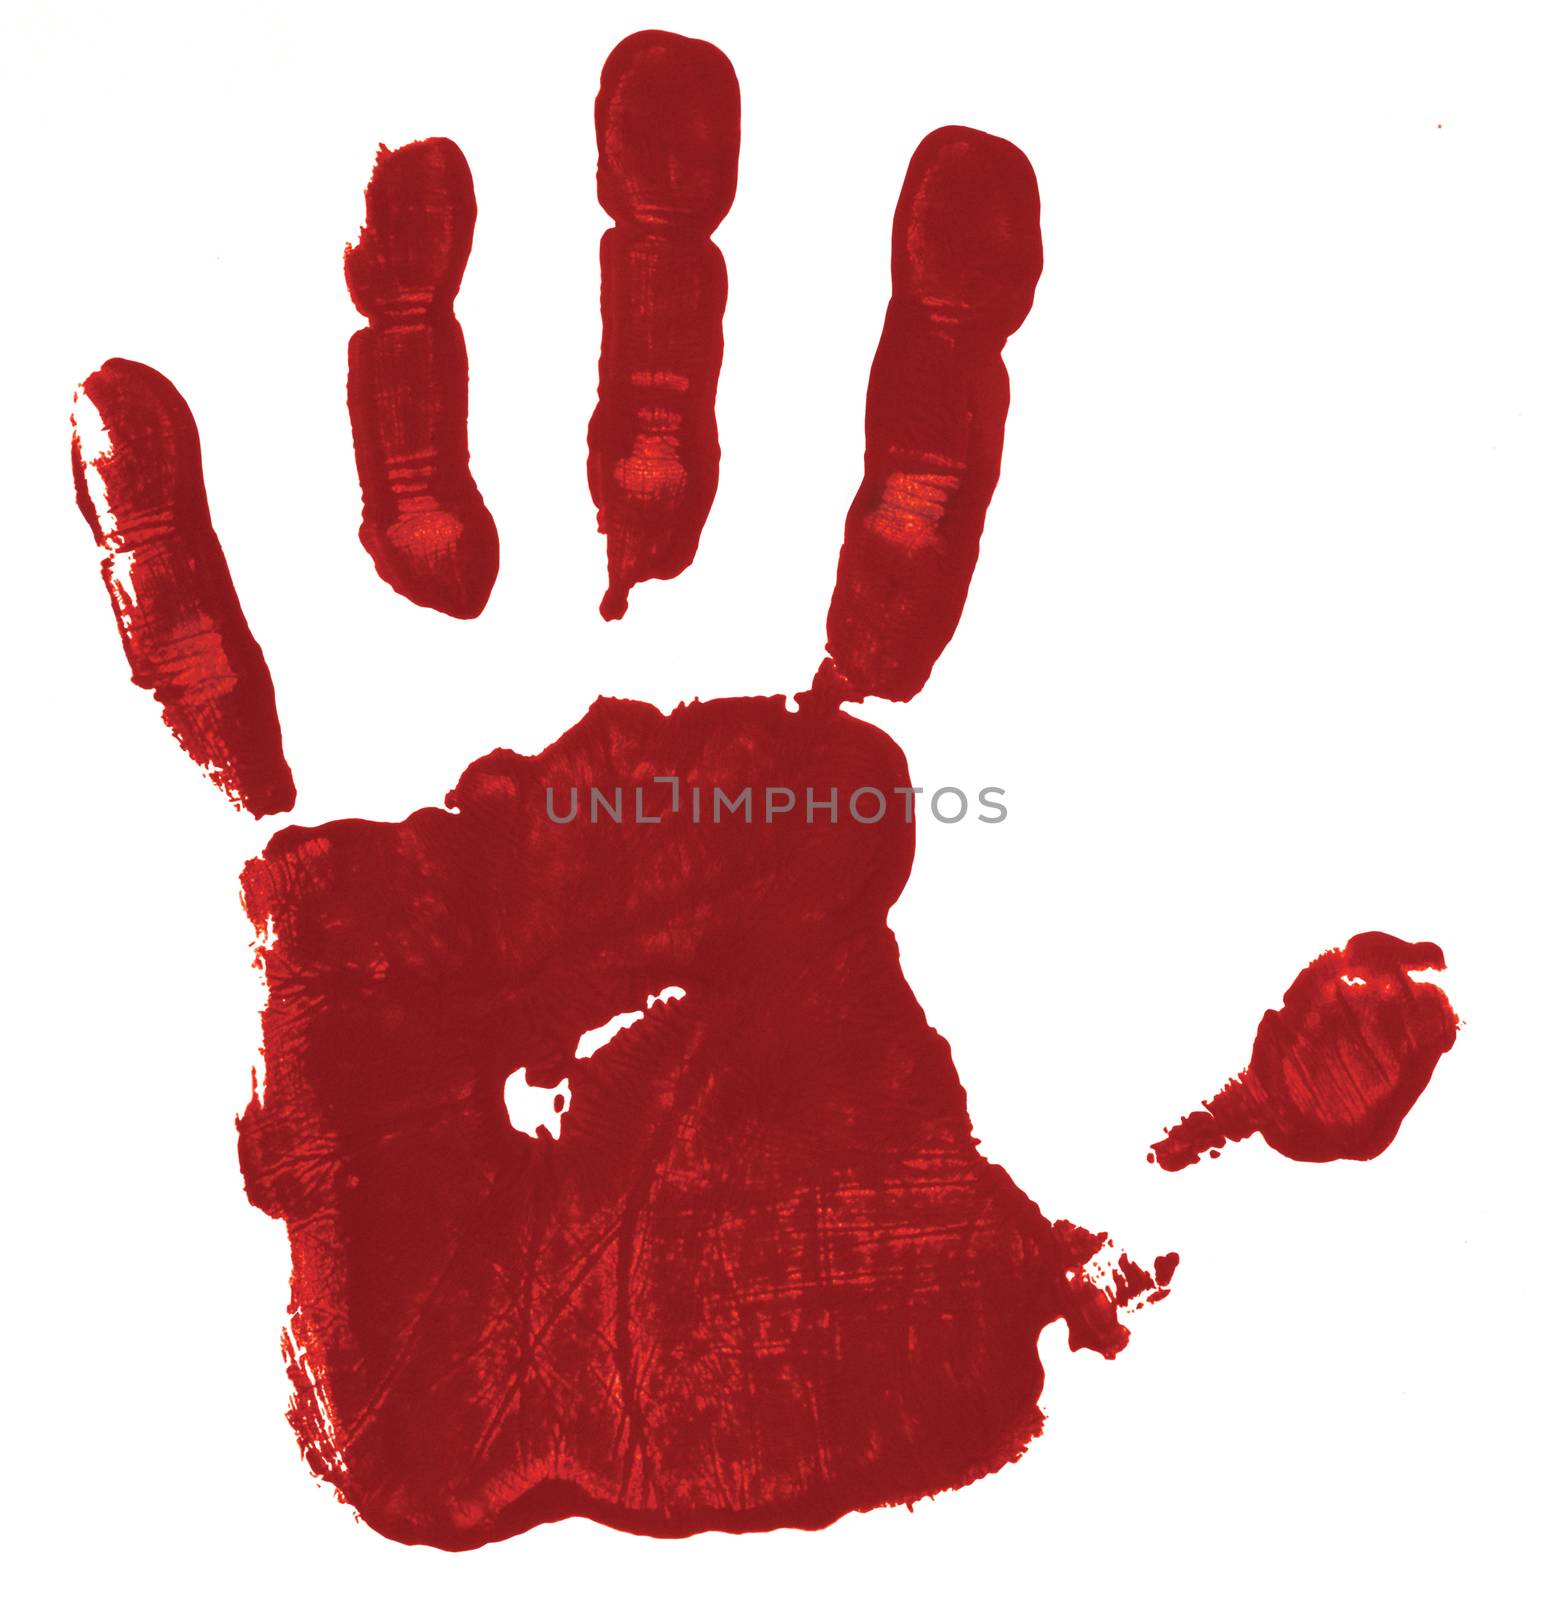 Red hand print on white background suggesting a bloody hand, a possible symbol of guilt.